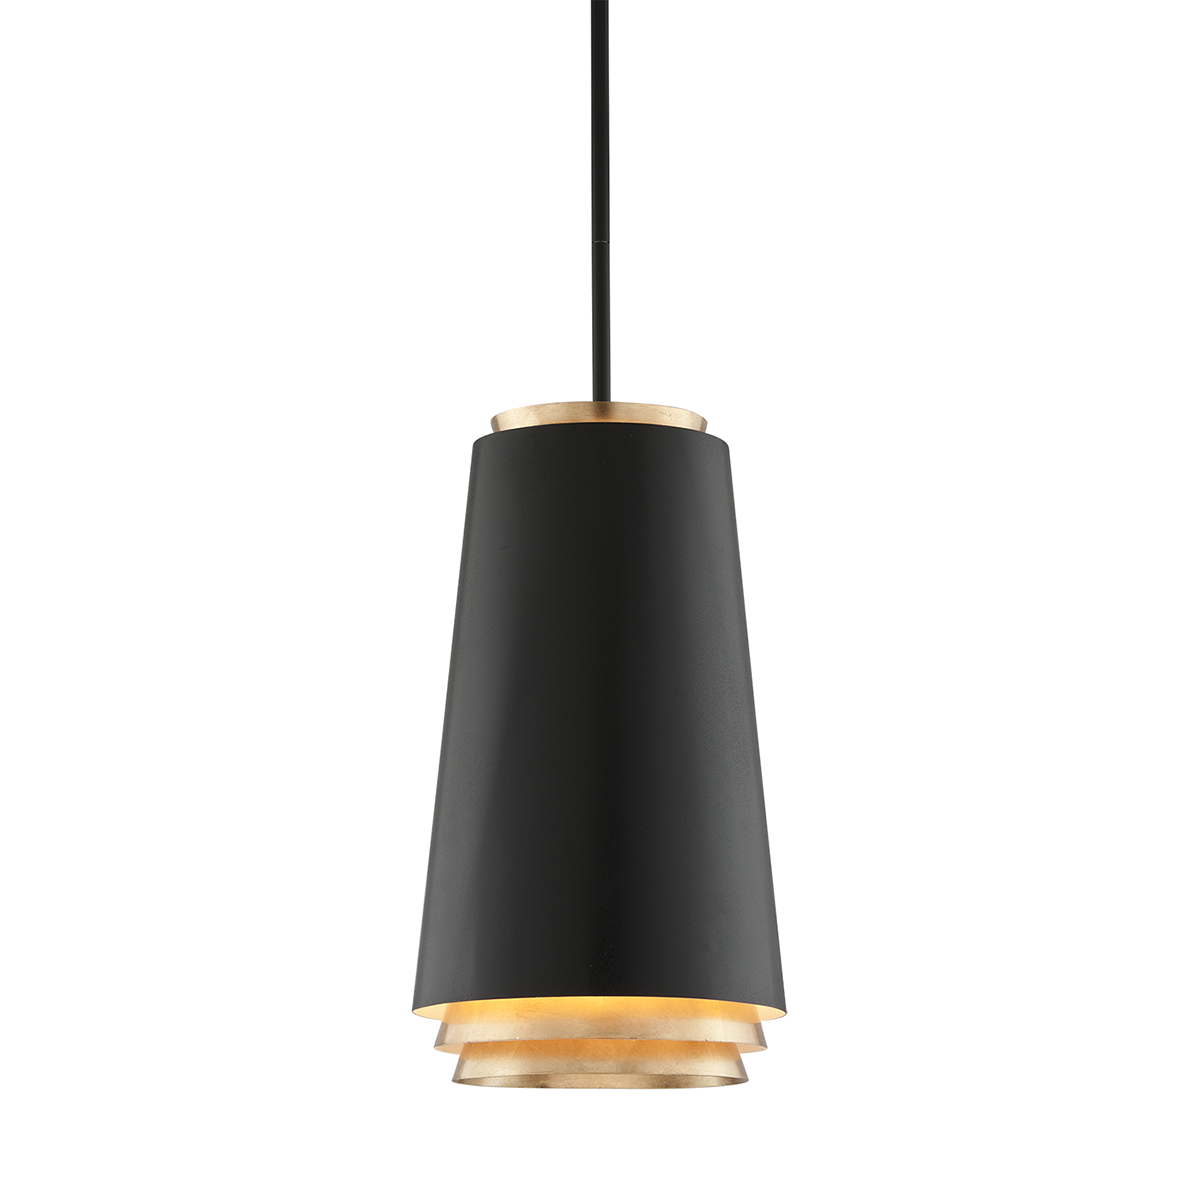 Hudson Valley Lighting Fahrenheit Large Pendant Light with Hand-Worked Iron